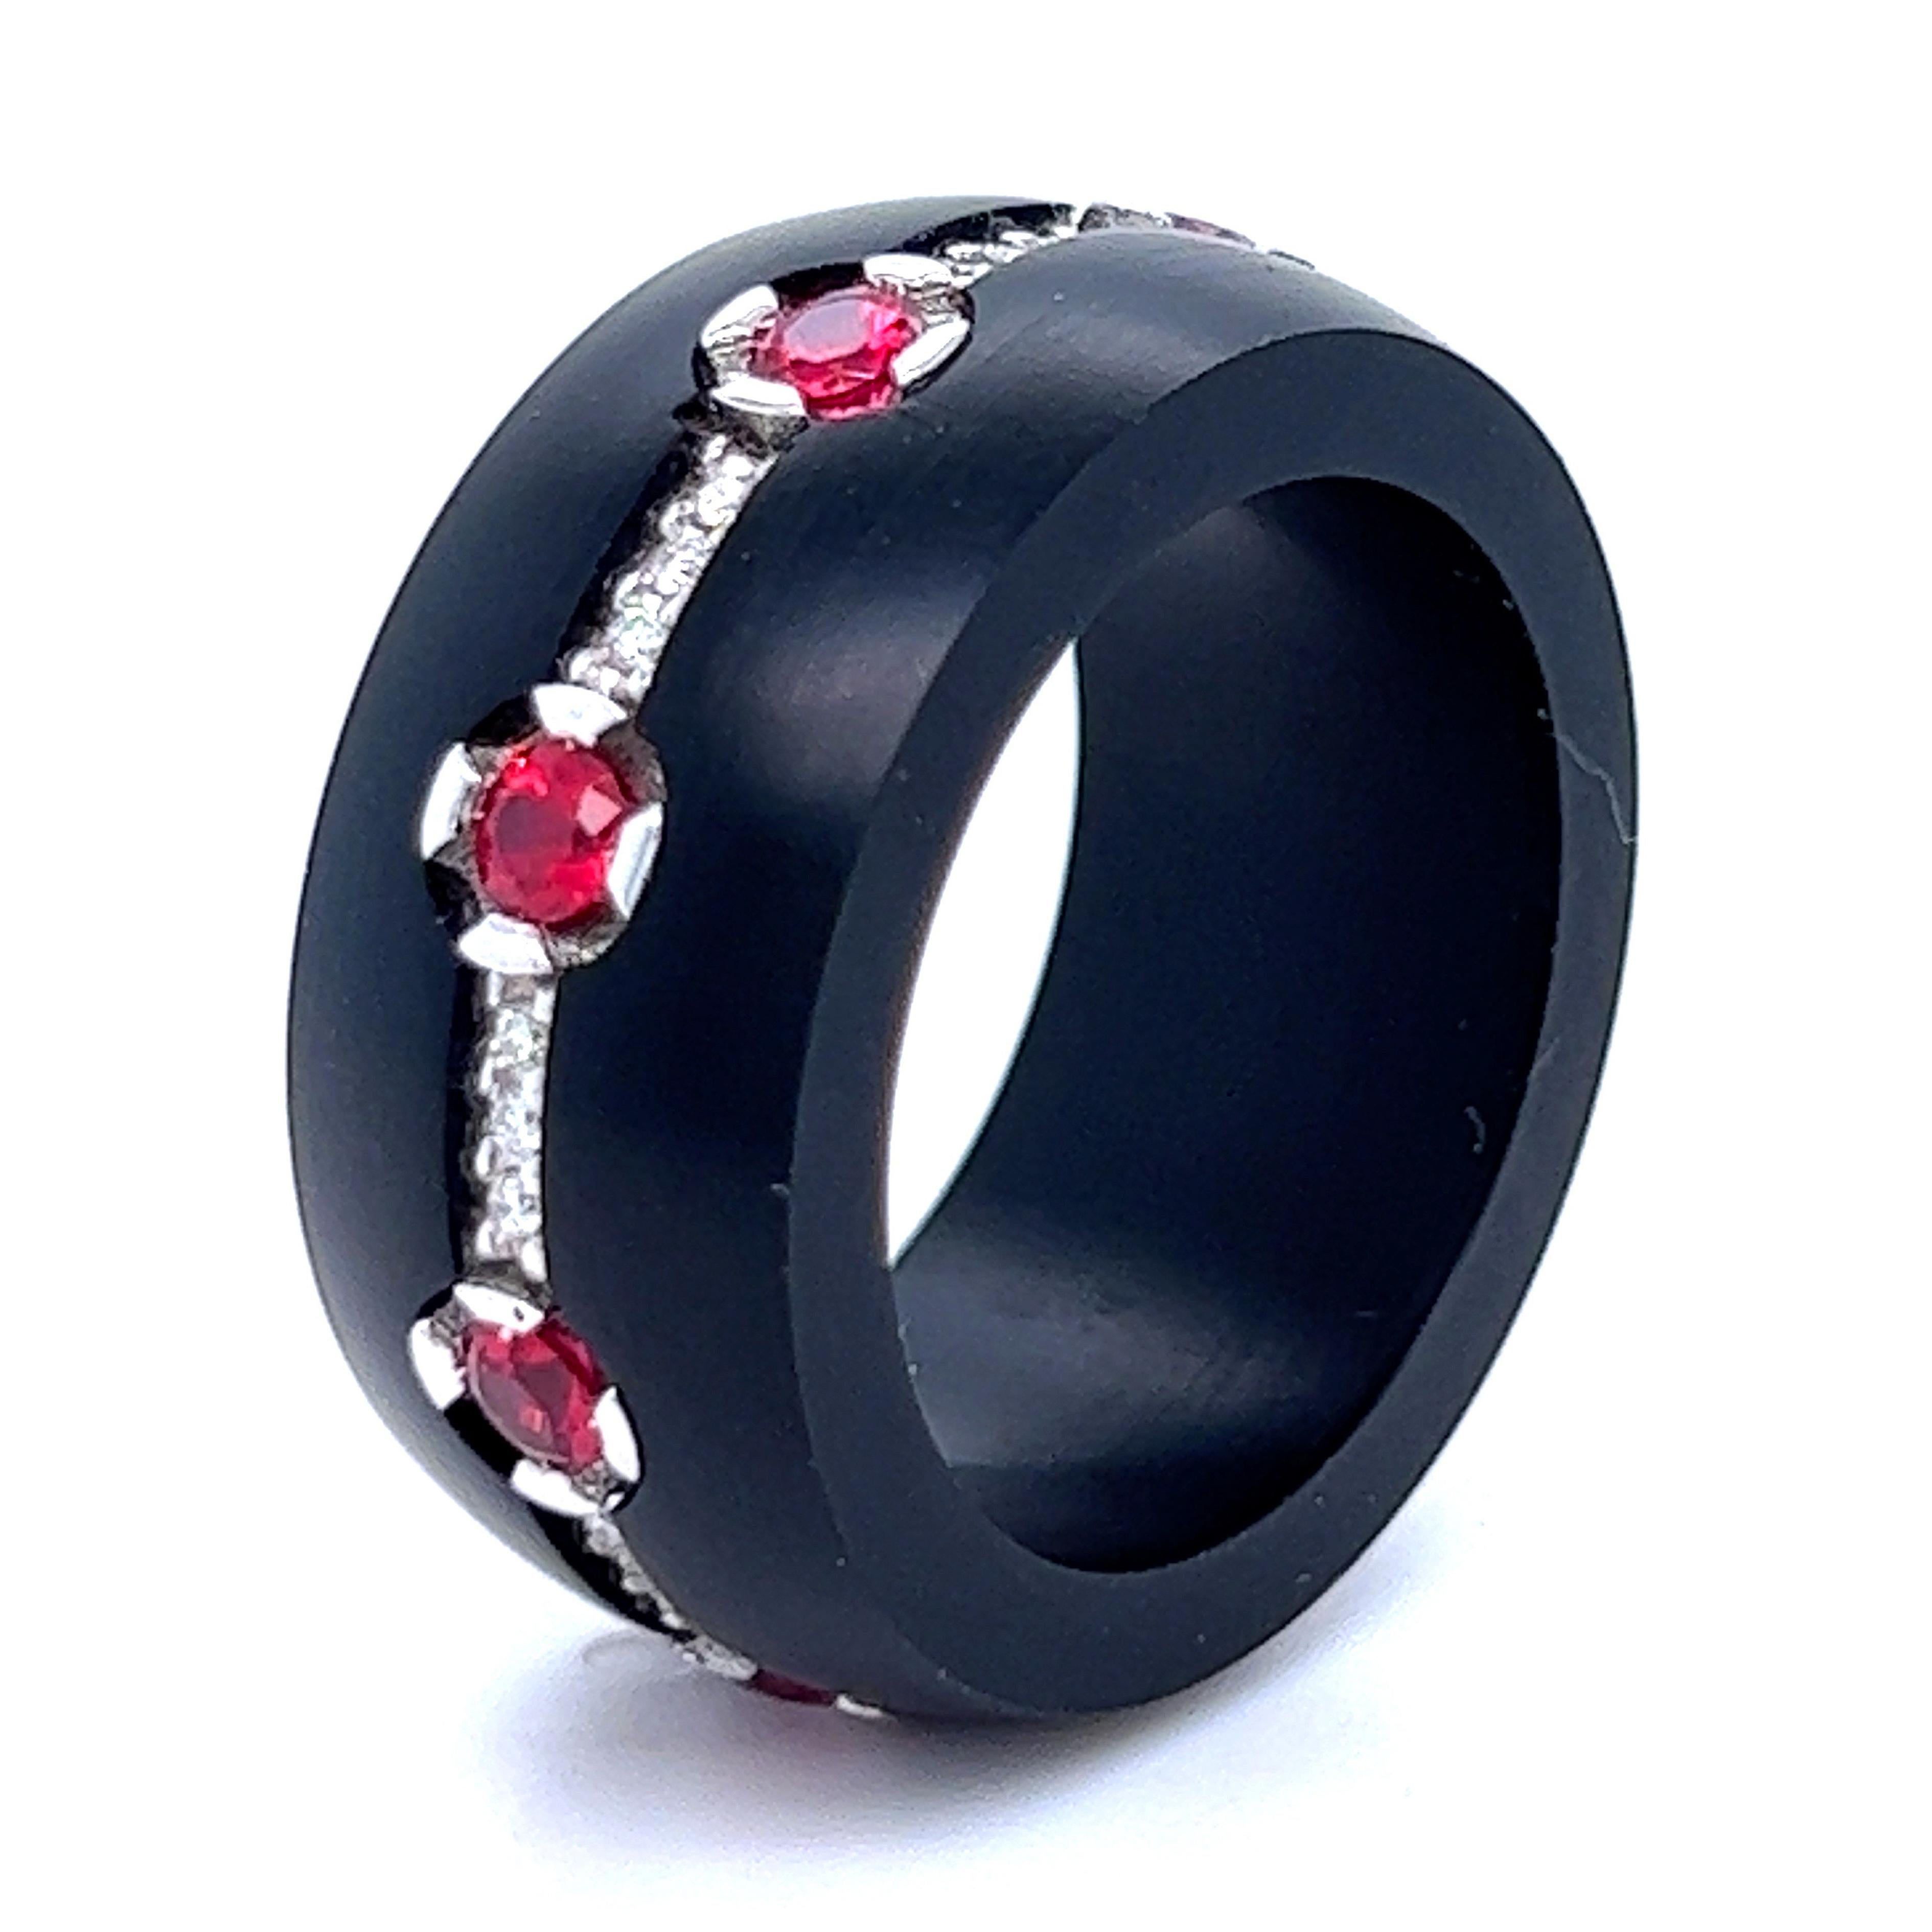 An original 1930, Art Déco, one-of-a-kind eternity band is set in a contemporary hand inlaid jet ring, to create a timeless, absolutely chic piece.
0.30Kt Top Quality Brilliant Cut White Diamond and 1Kt Natural Ruby combined with exquisite